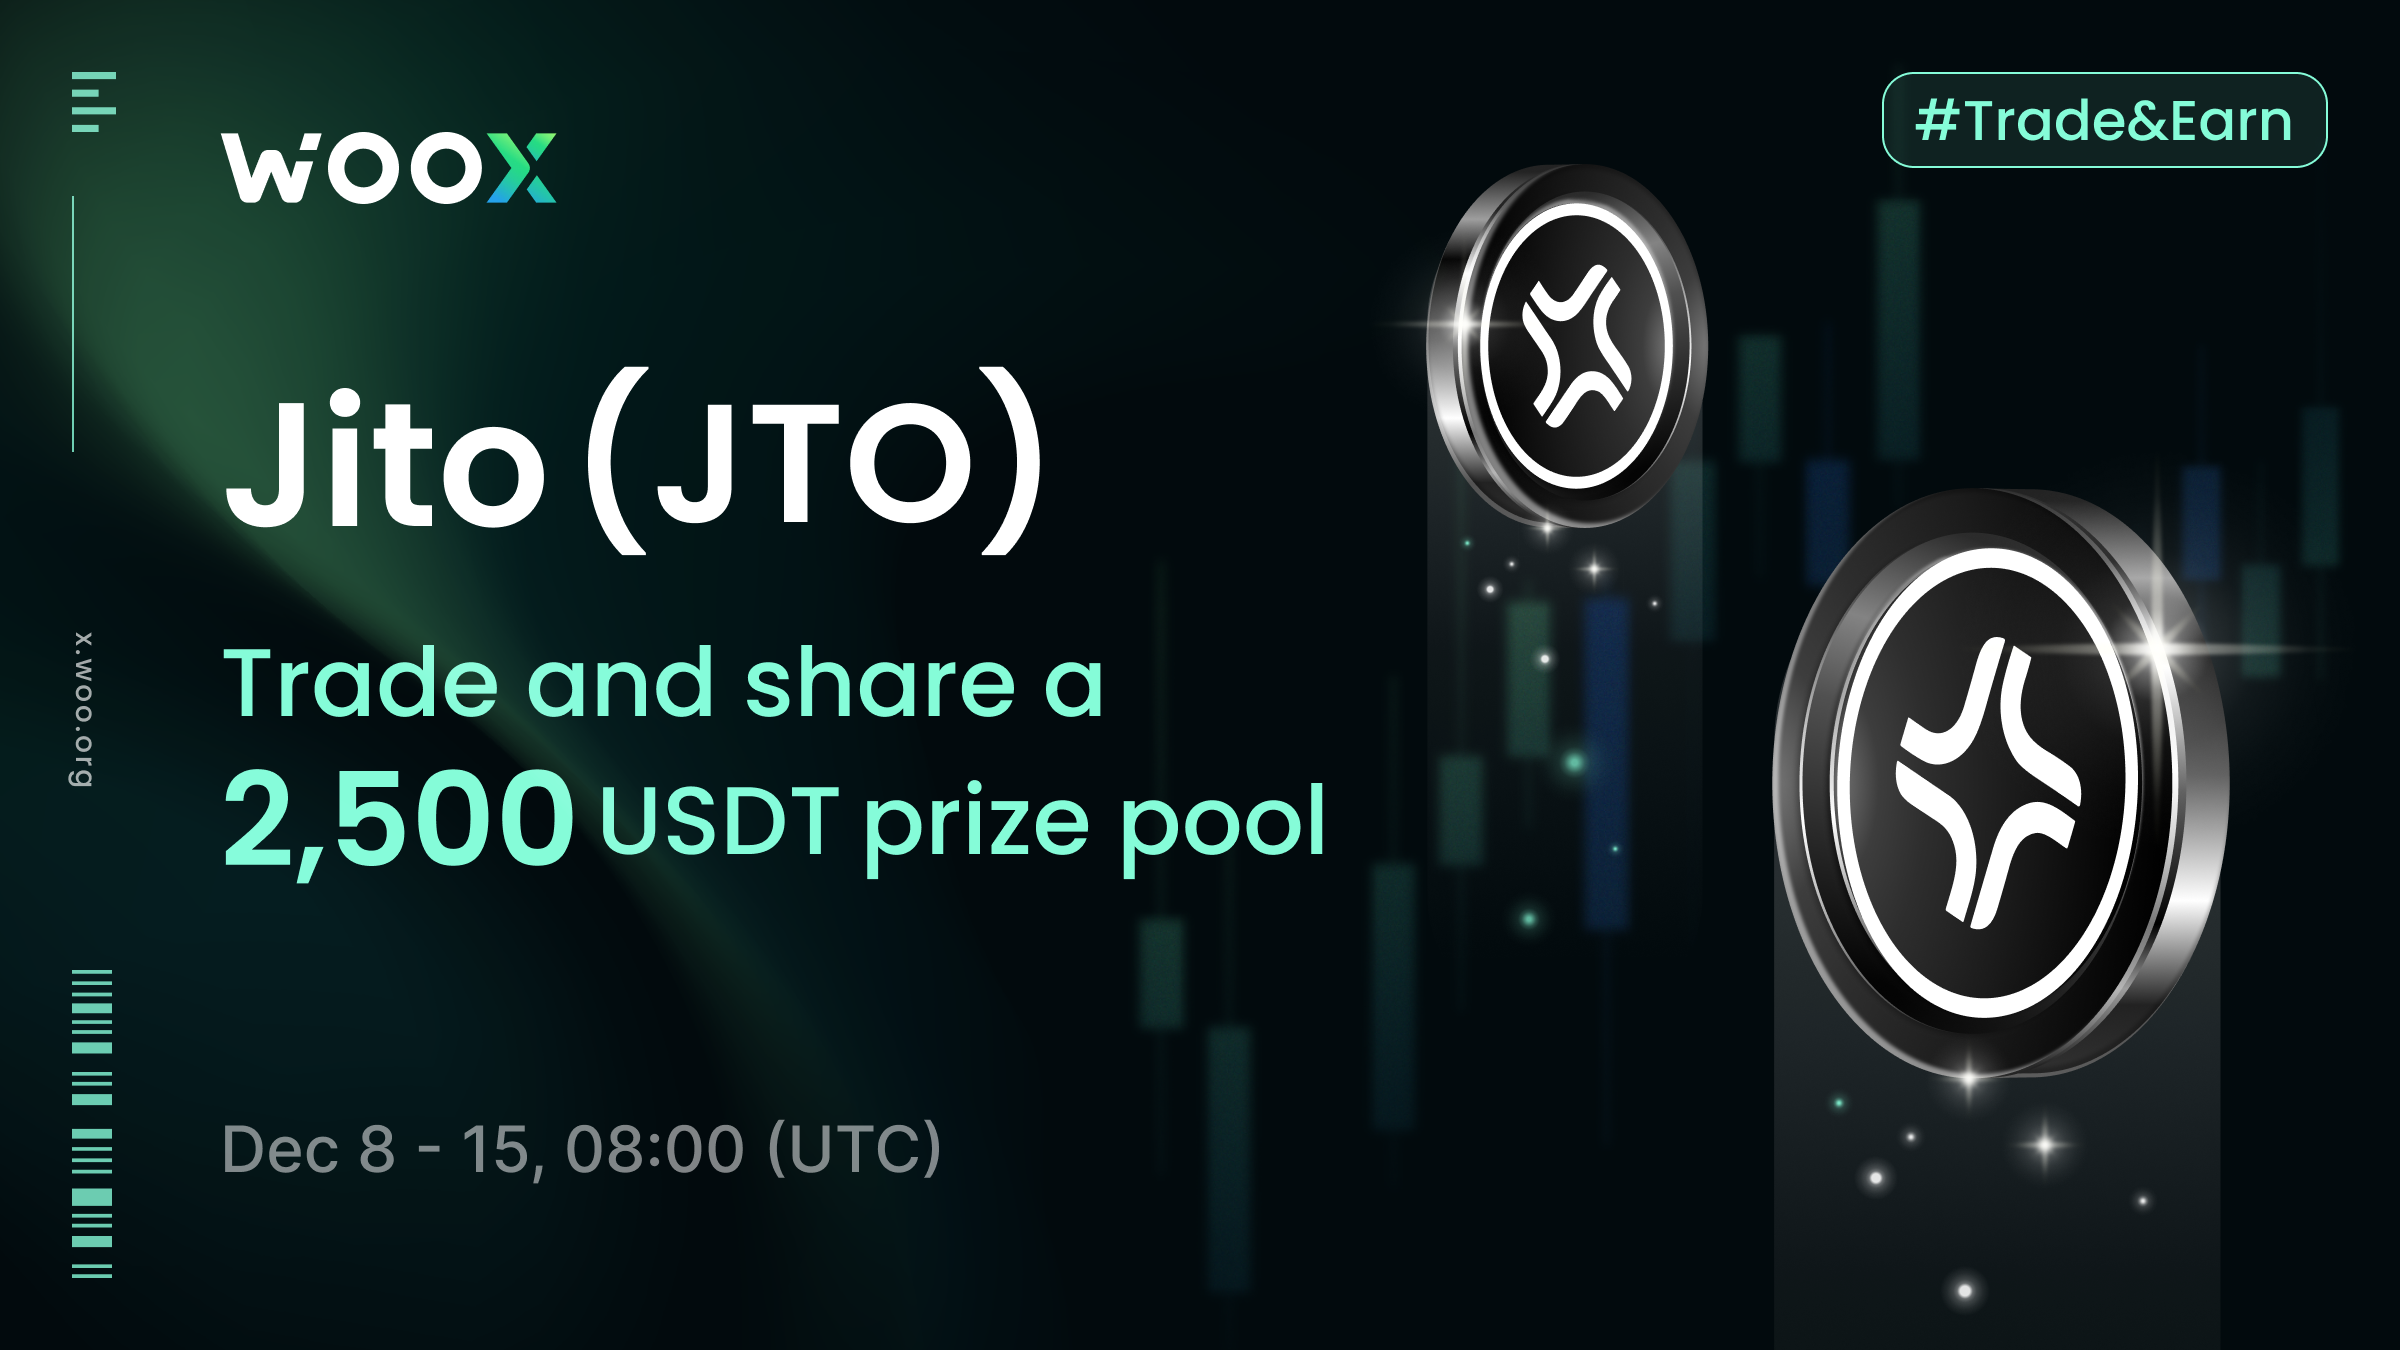 New Listing: Jito (JTO) on WOO X - Trade and share a 2,500 USDT prize pool!